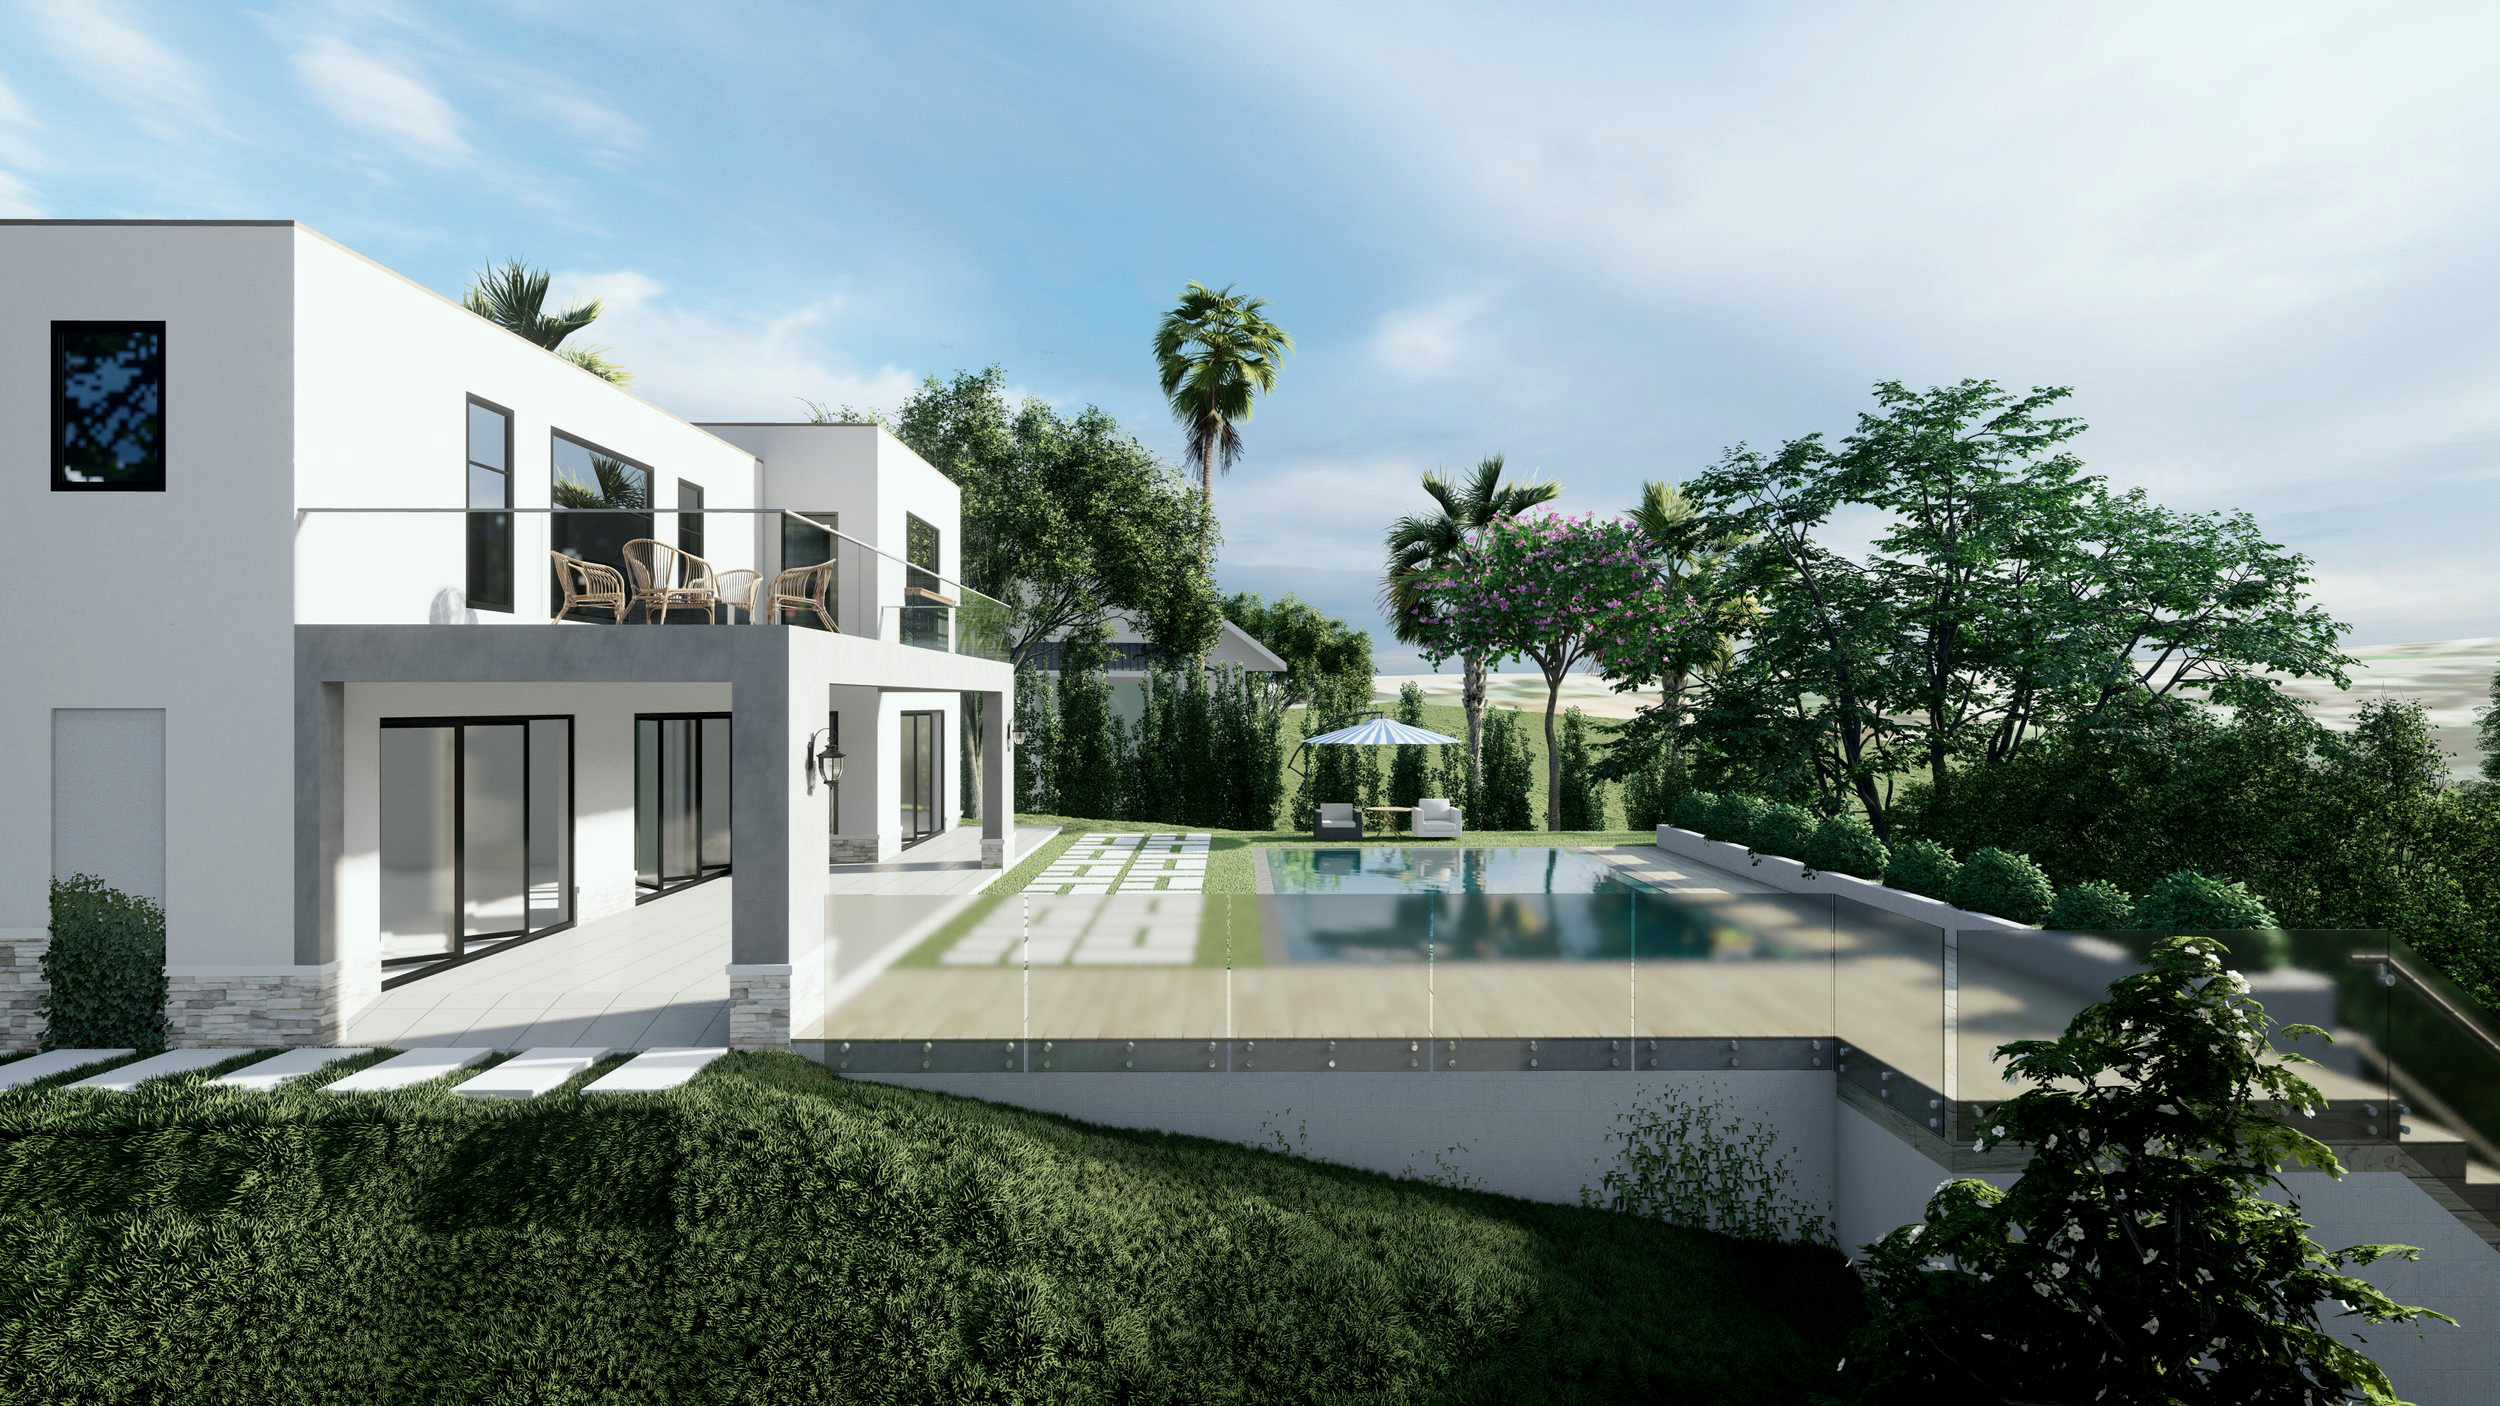 Rendering of noncombustible home built with concrete wall panels